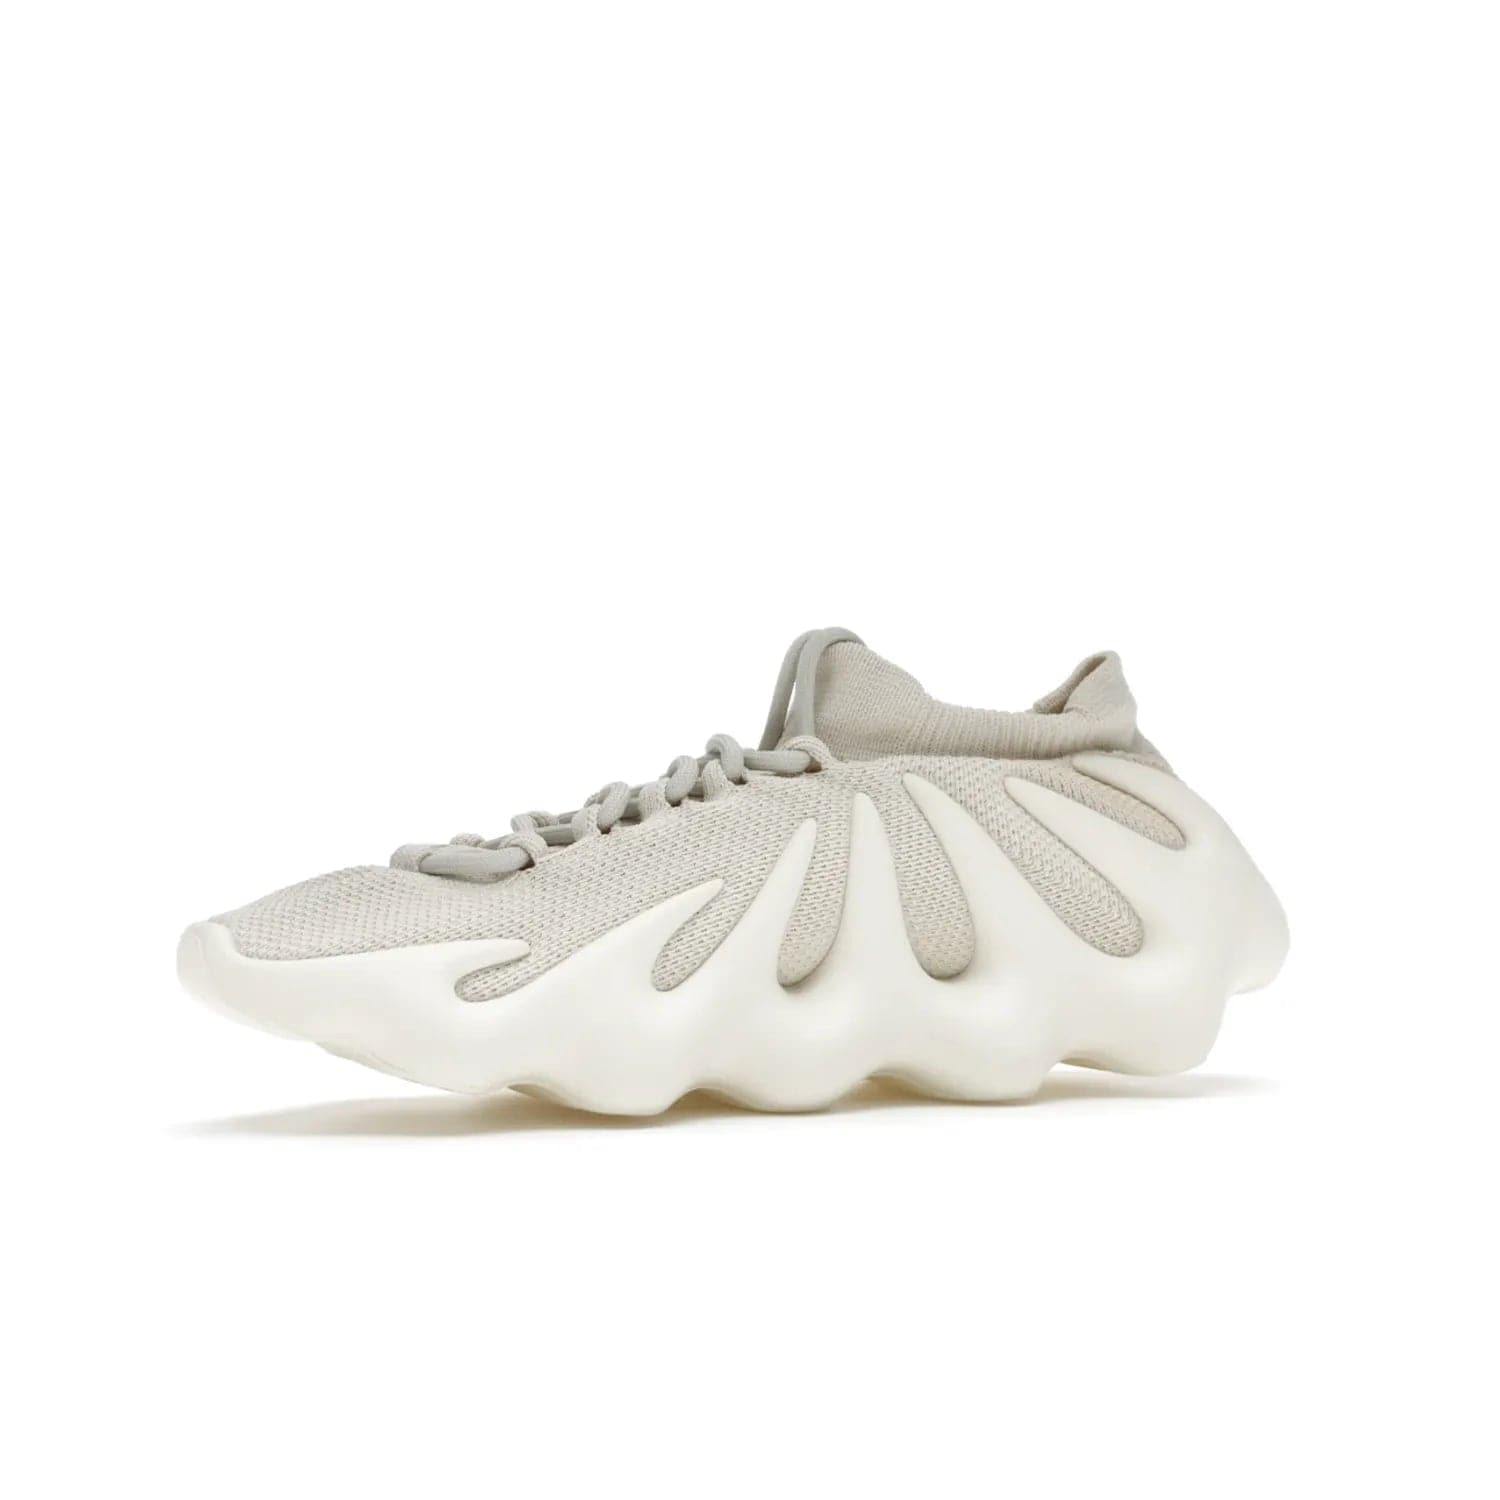 adidas Yeezy 450 Cloud White - Image 17 - Only at www.BallersClubKickz.com - Experience the future with the adidas Yeezy 450 Cloud White. A two-piece design featuring an extreme foam sole and mesh upper, this silhouette is expected to release in March 2021. Get your hands on this striking Cloud White/Cloud White colorway and stand out in the crowd.